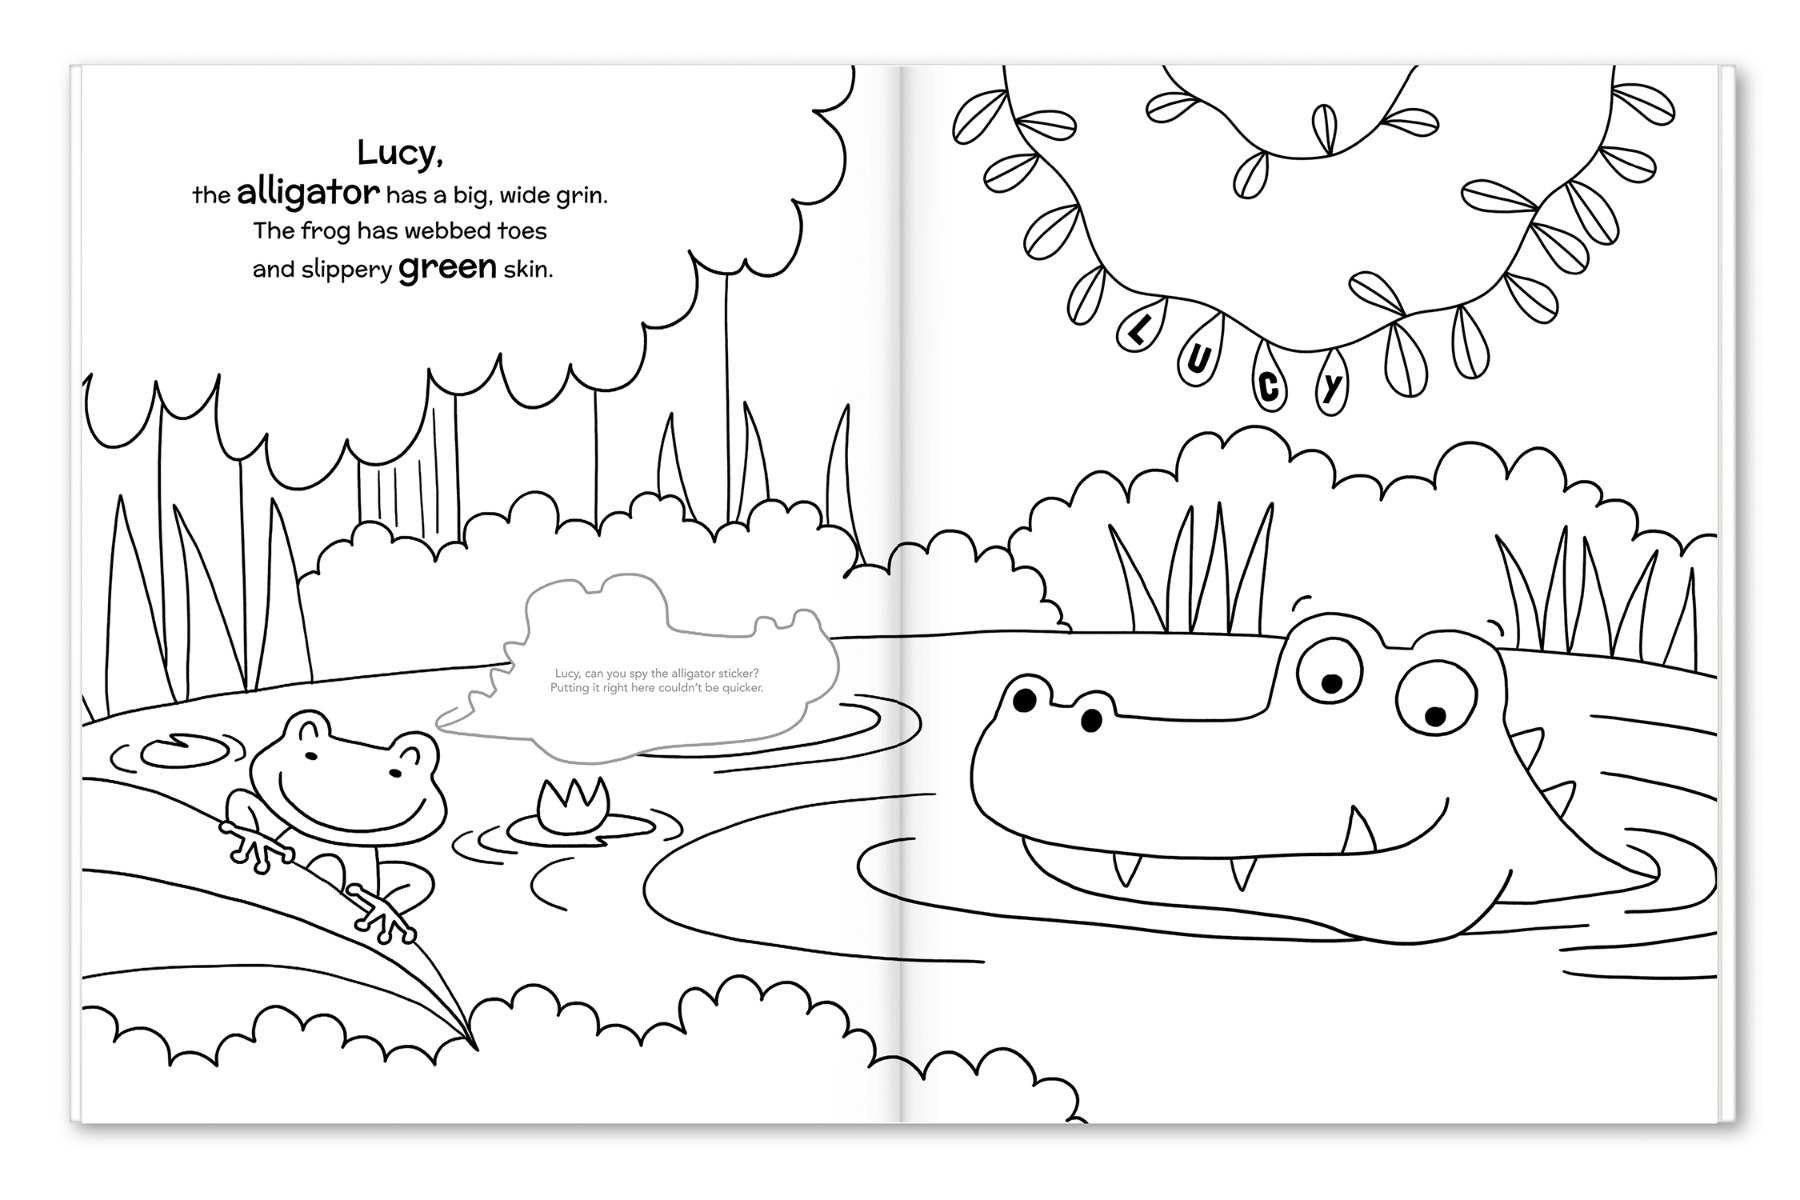 Space Coloring Book For Kids: Big Coloring Pages For Kids Ages 4-8